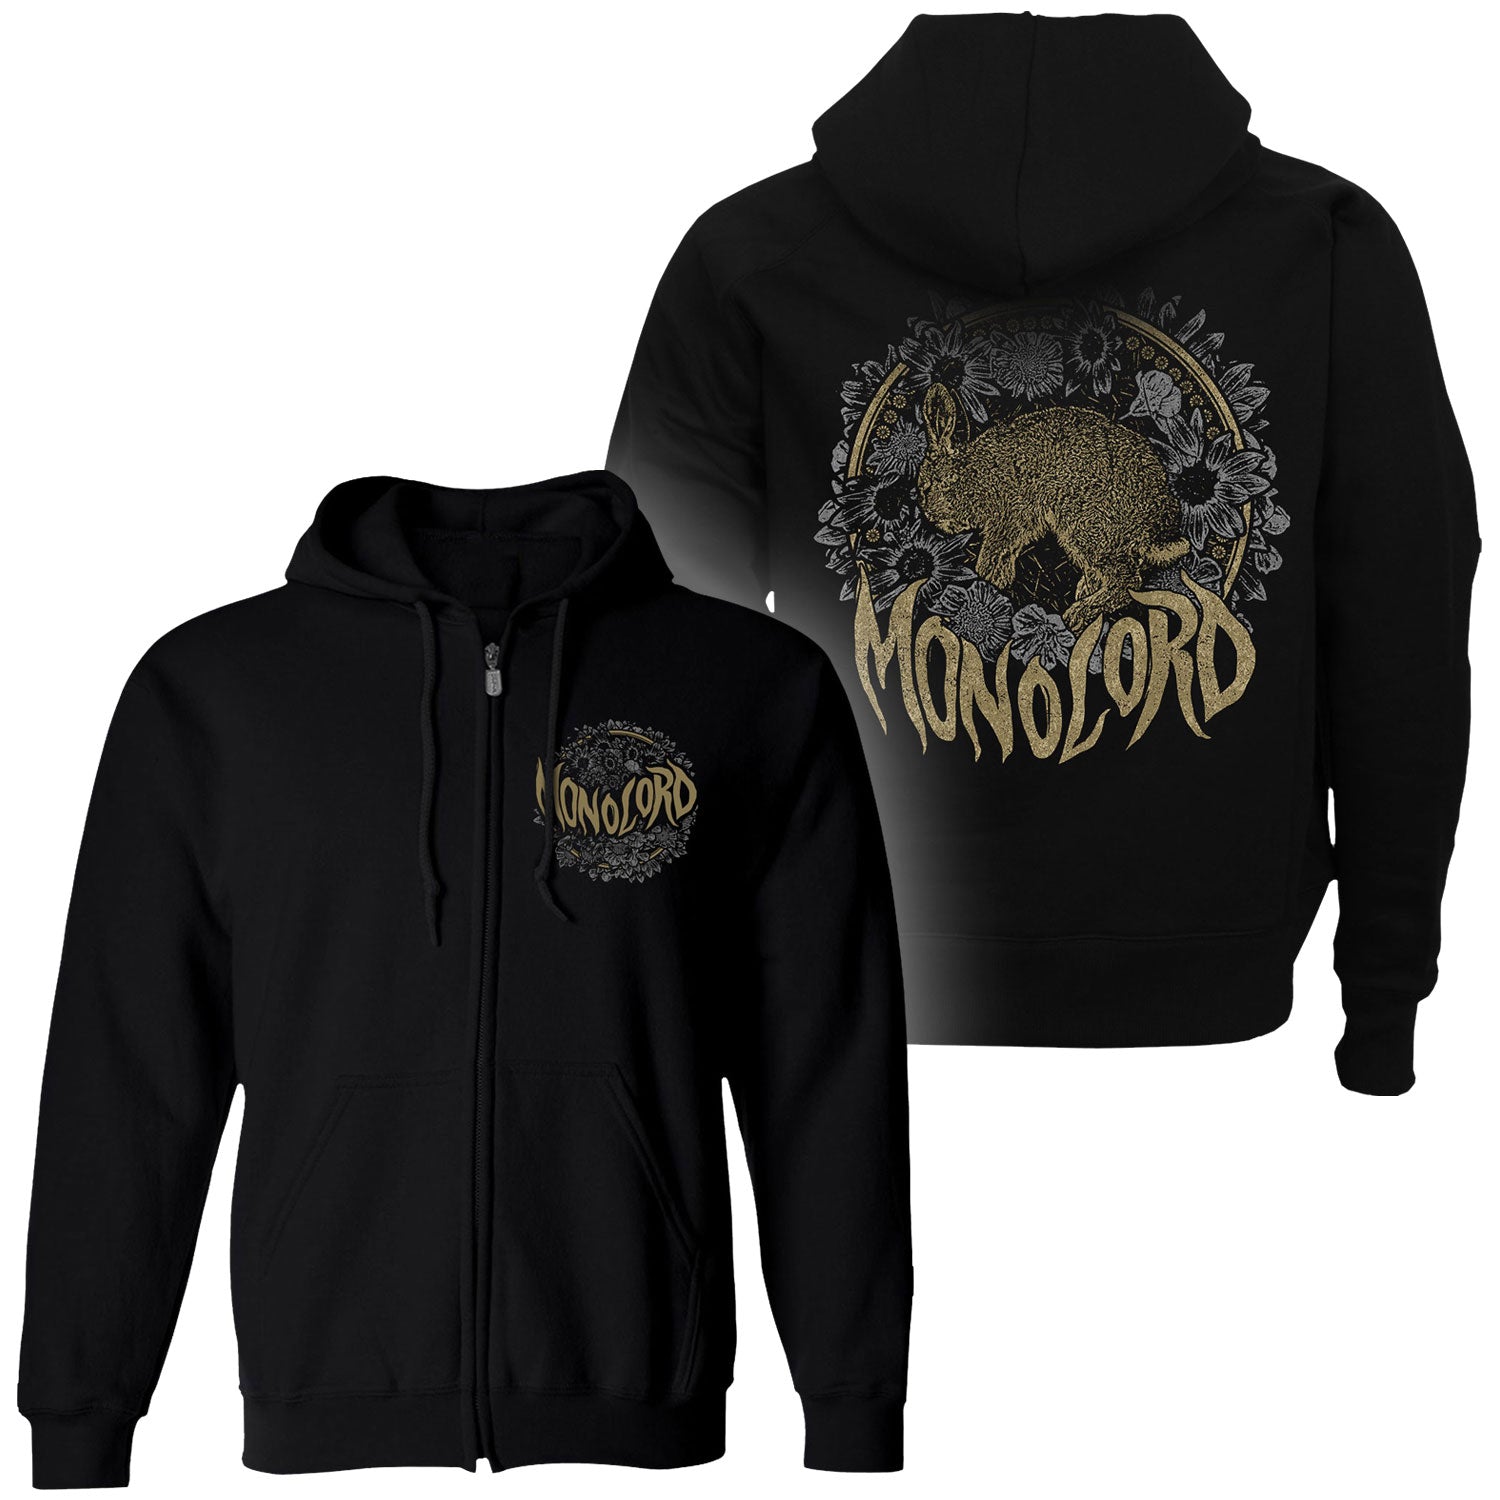 Monolord "Your Time To Shine" Zip Hoodie